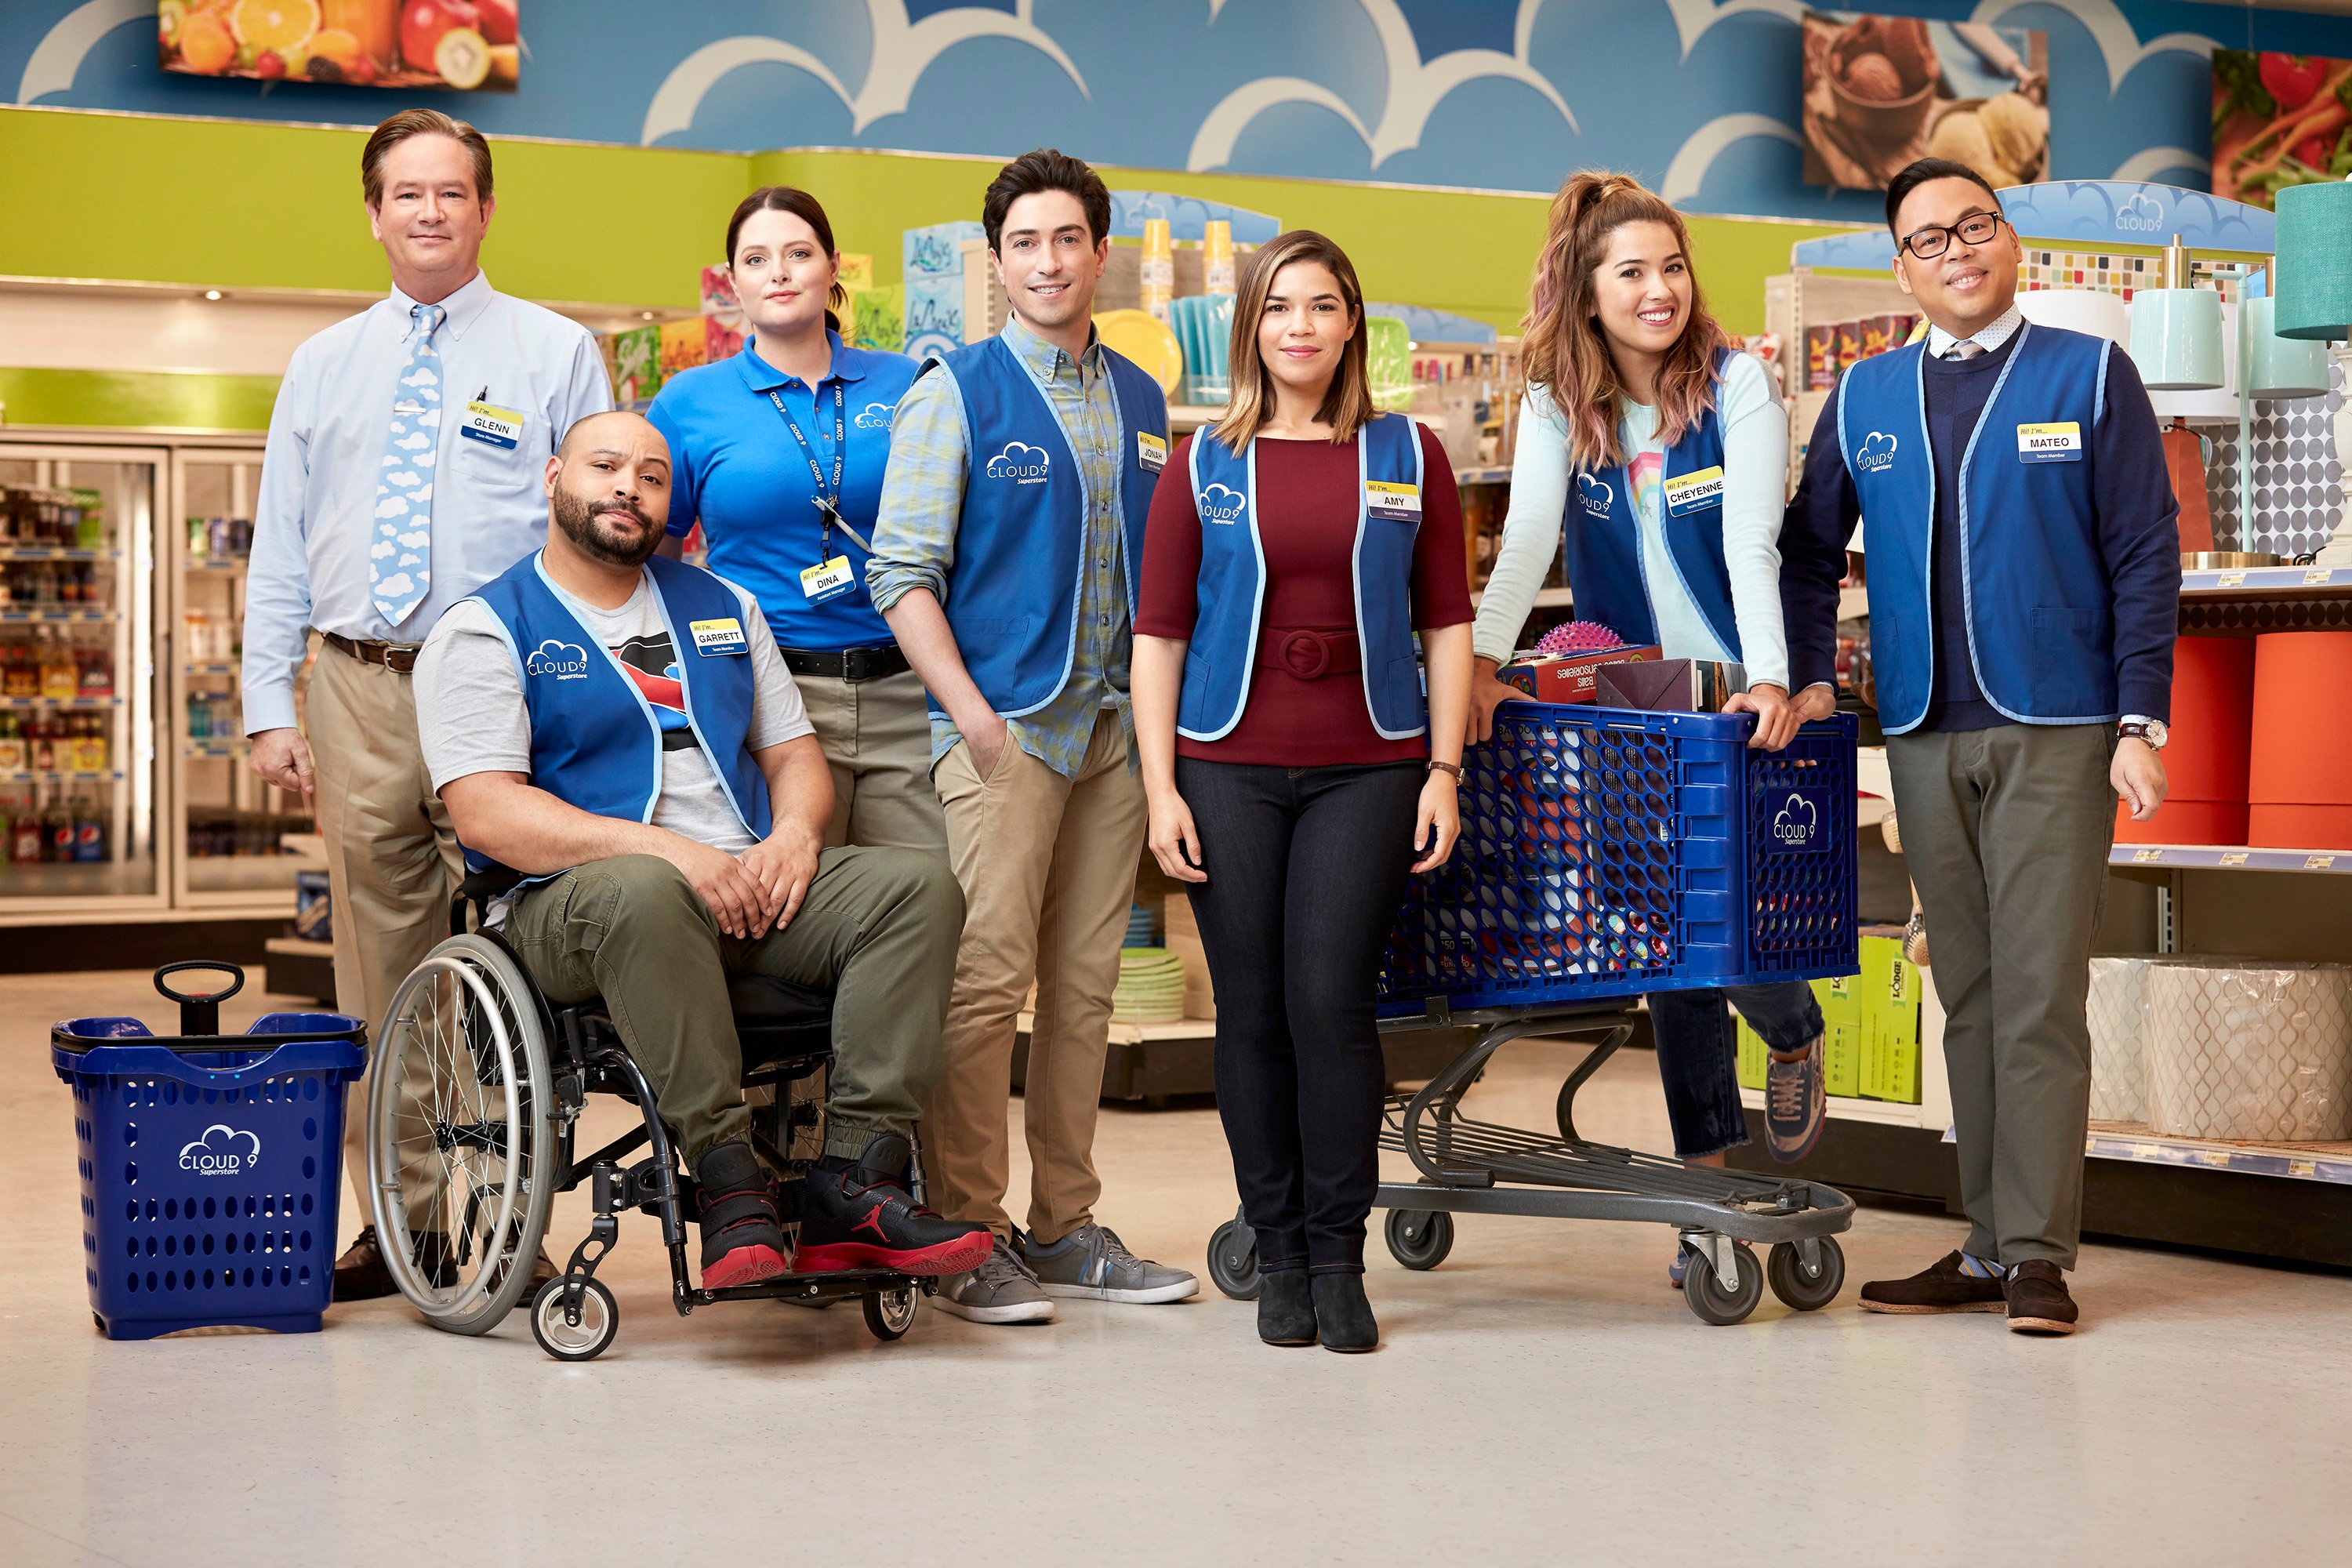 Superstore (@nbcsuperstore) • Instagram photos and videos